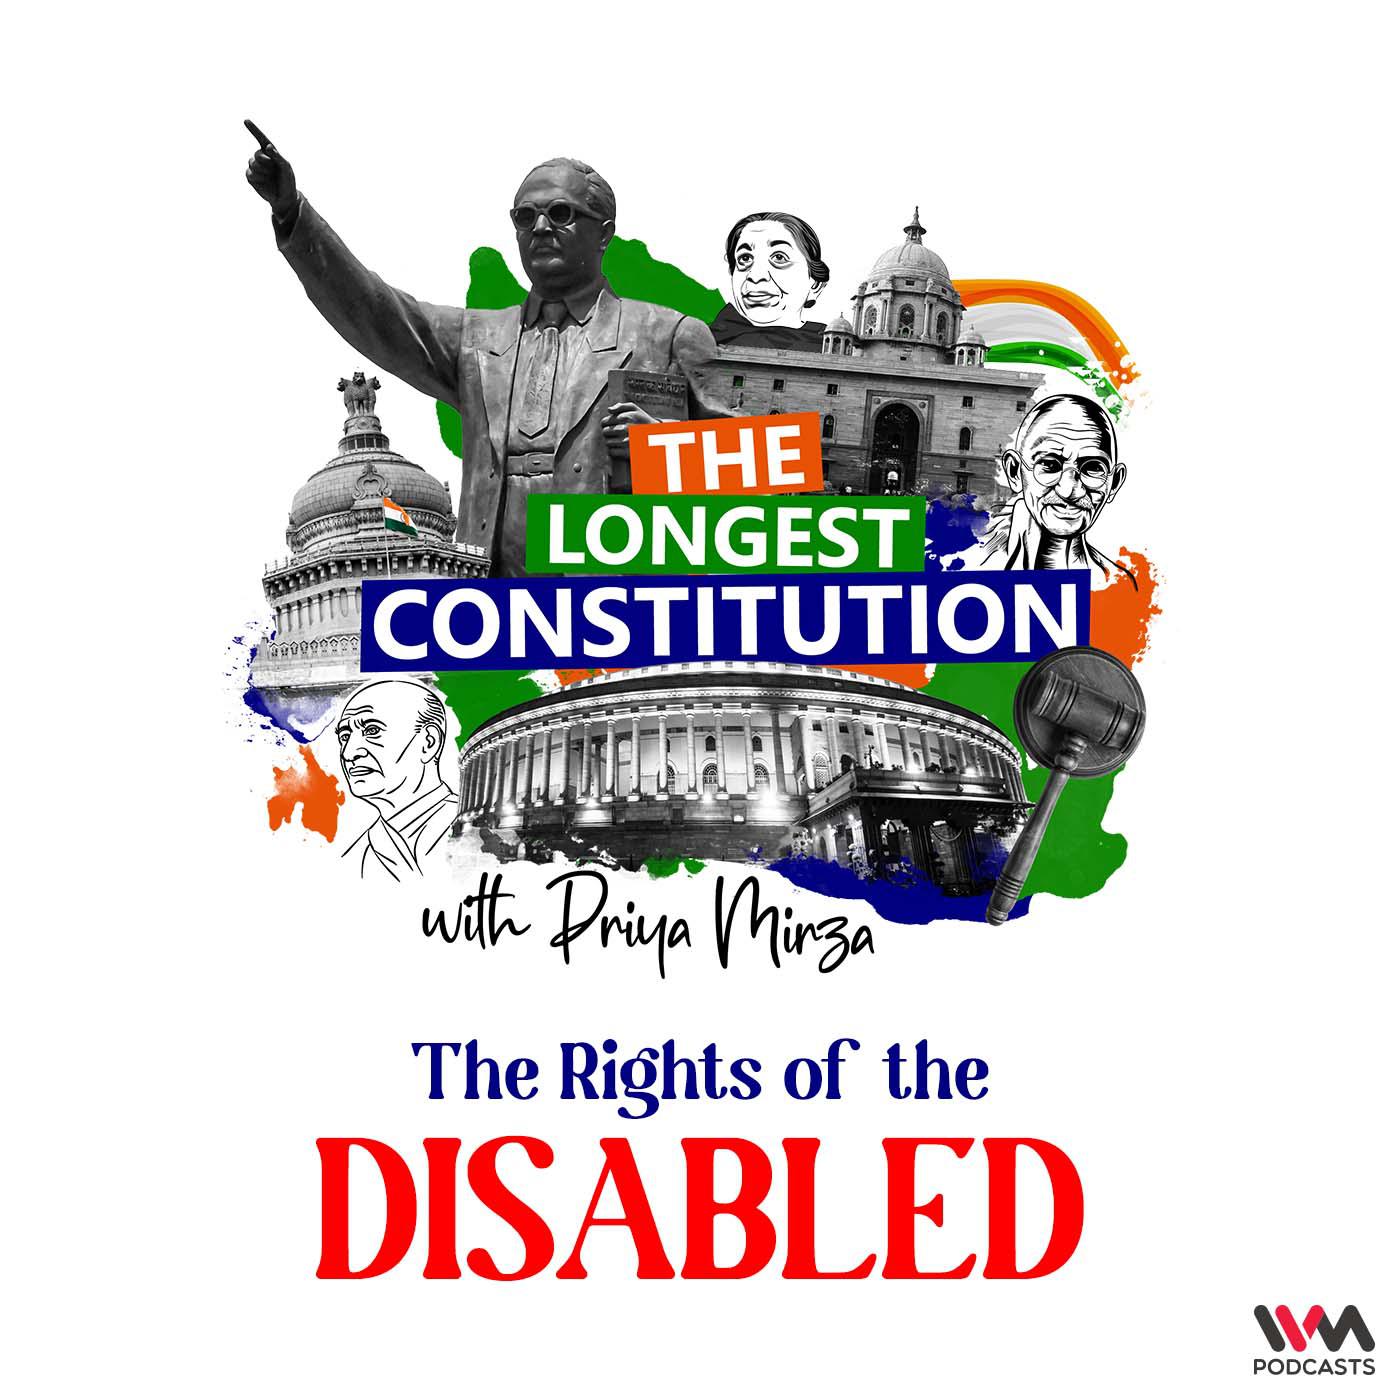 The Rights of the Disabled